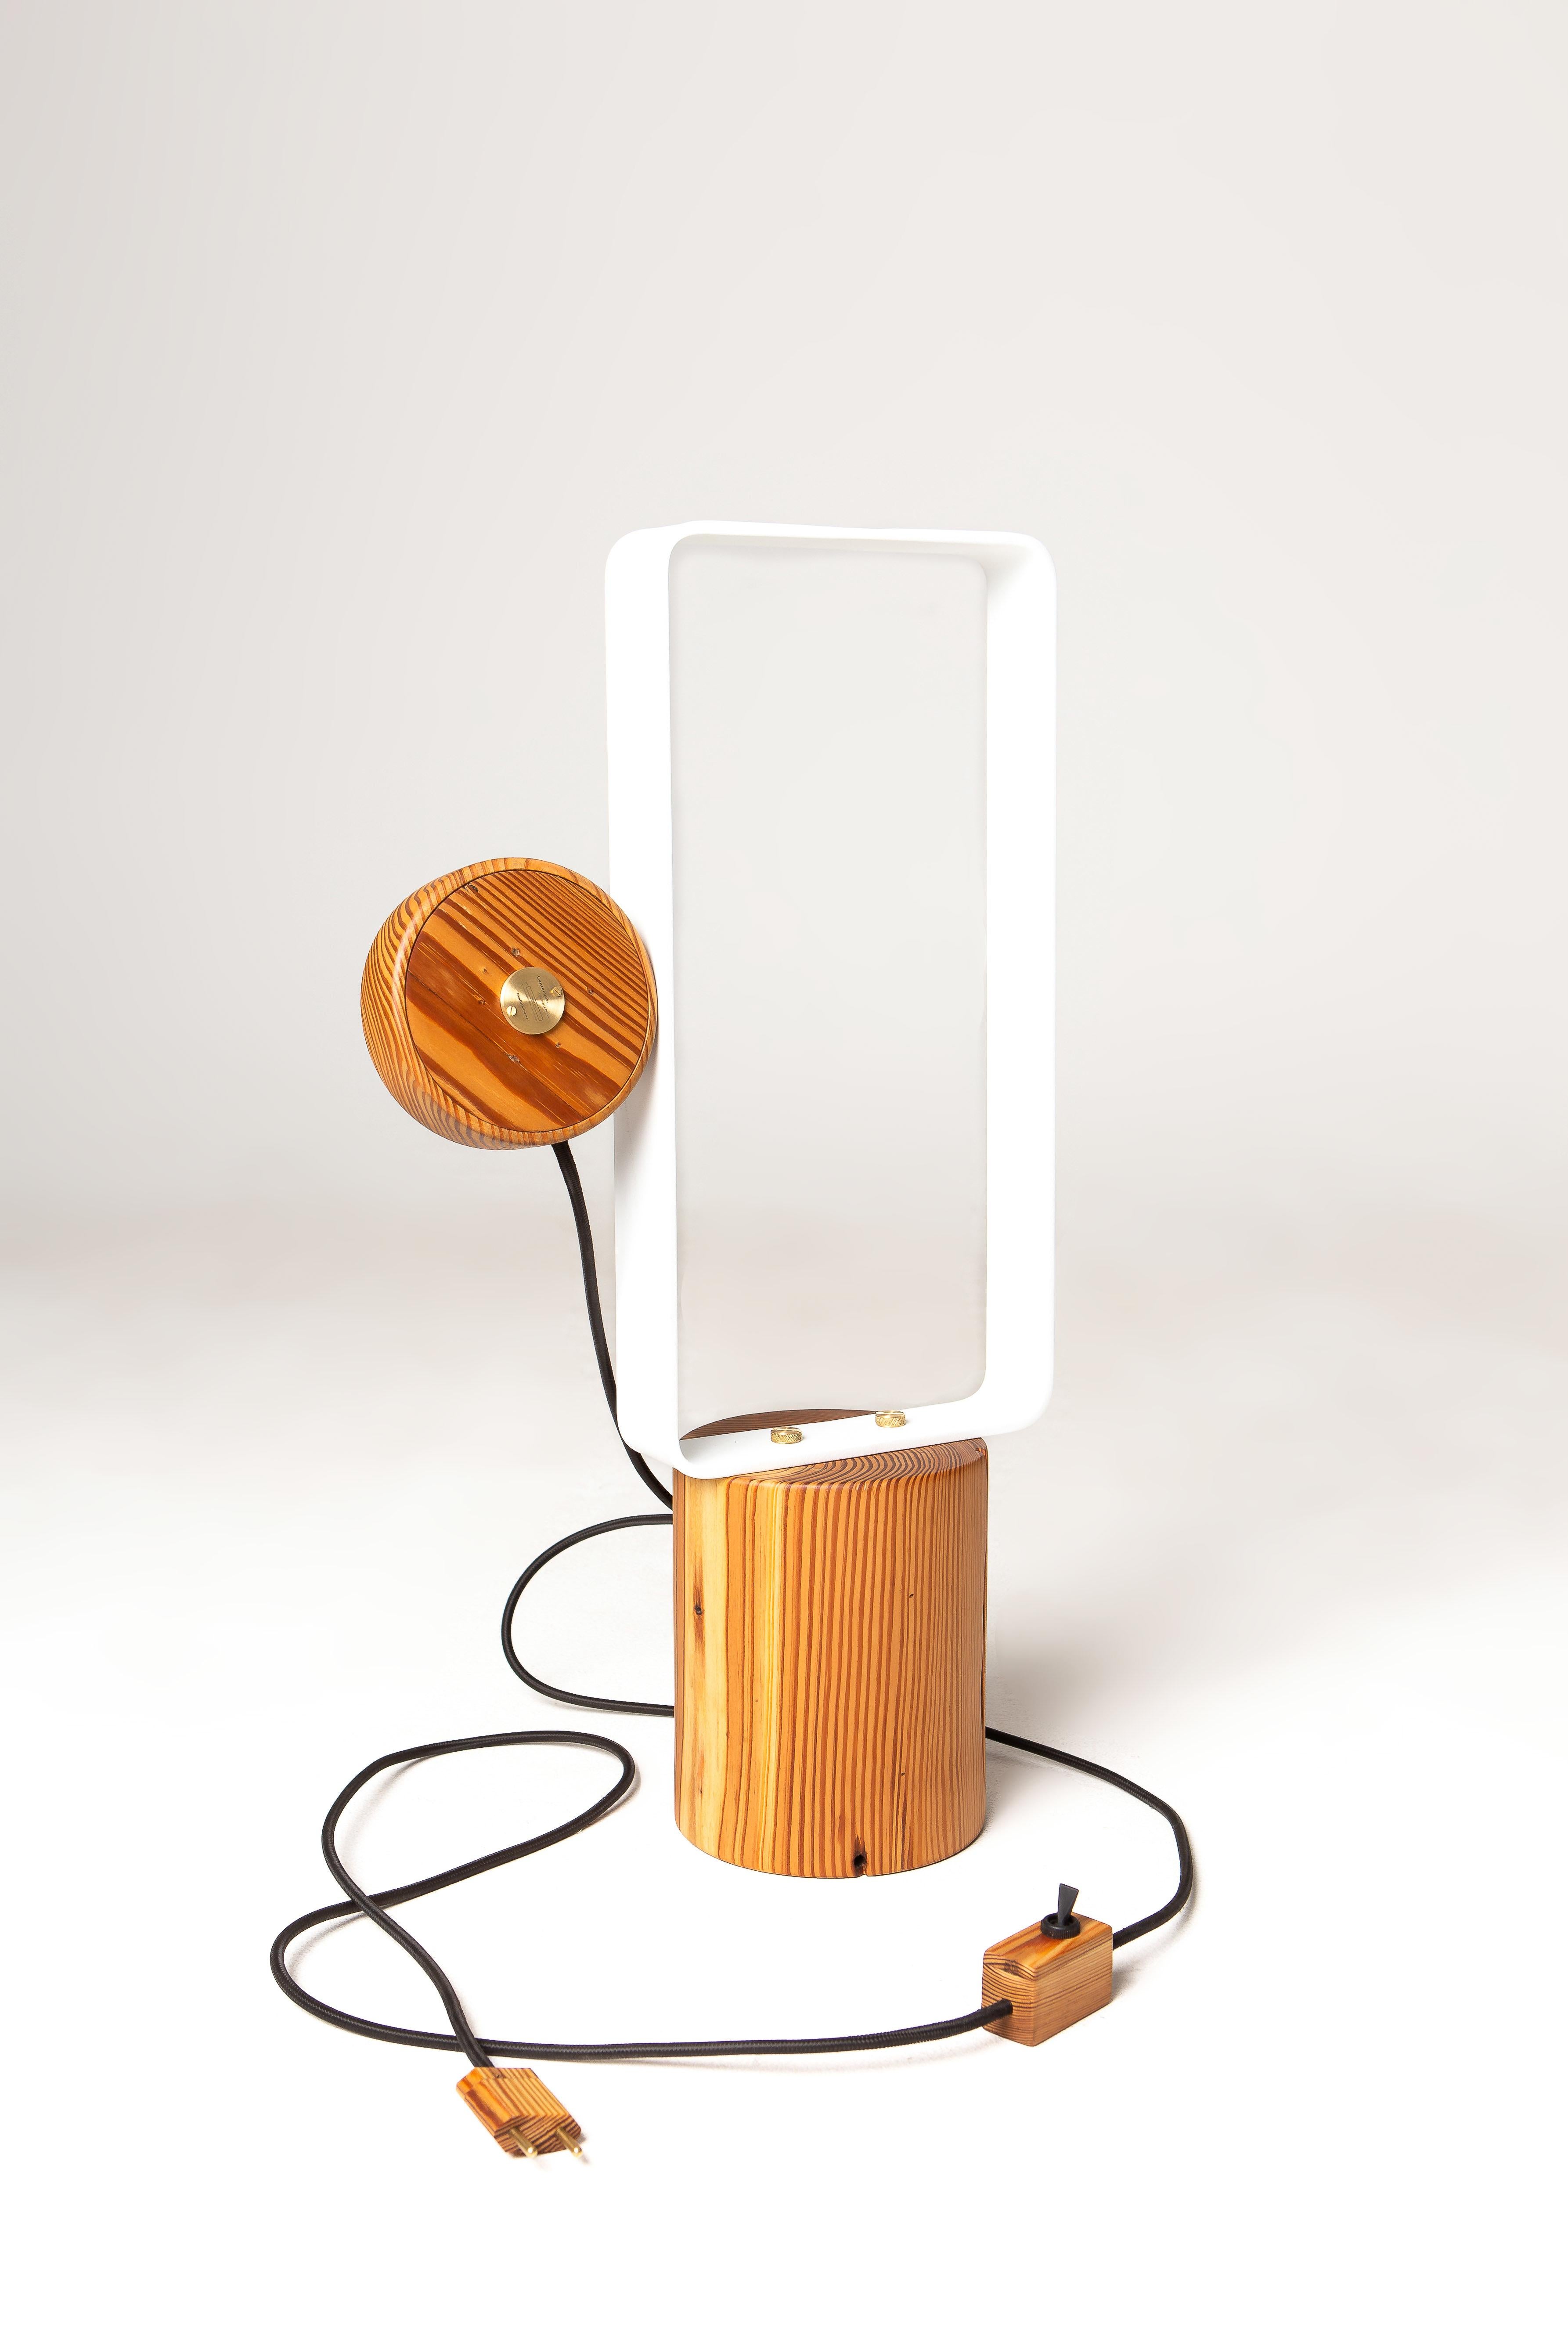 Contemporary Minimalist Brazilian Handcrafted Lamp ''Ponta'' by Dimitrih Correa For Sale